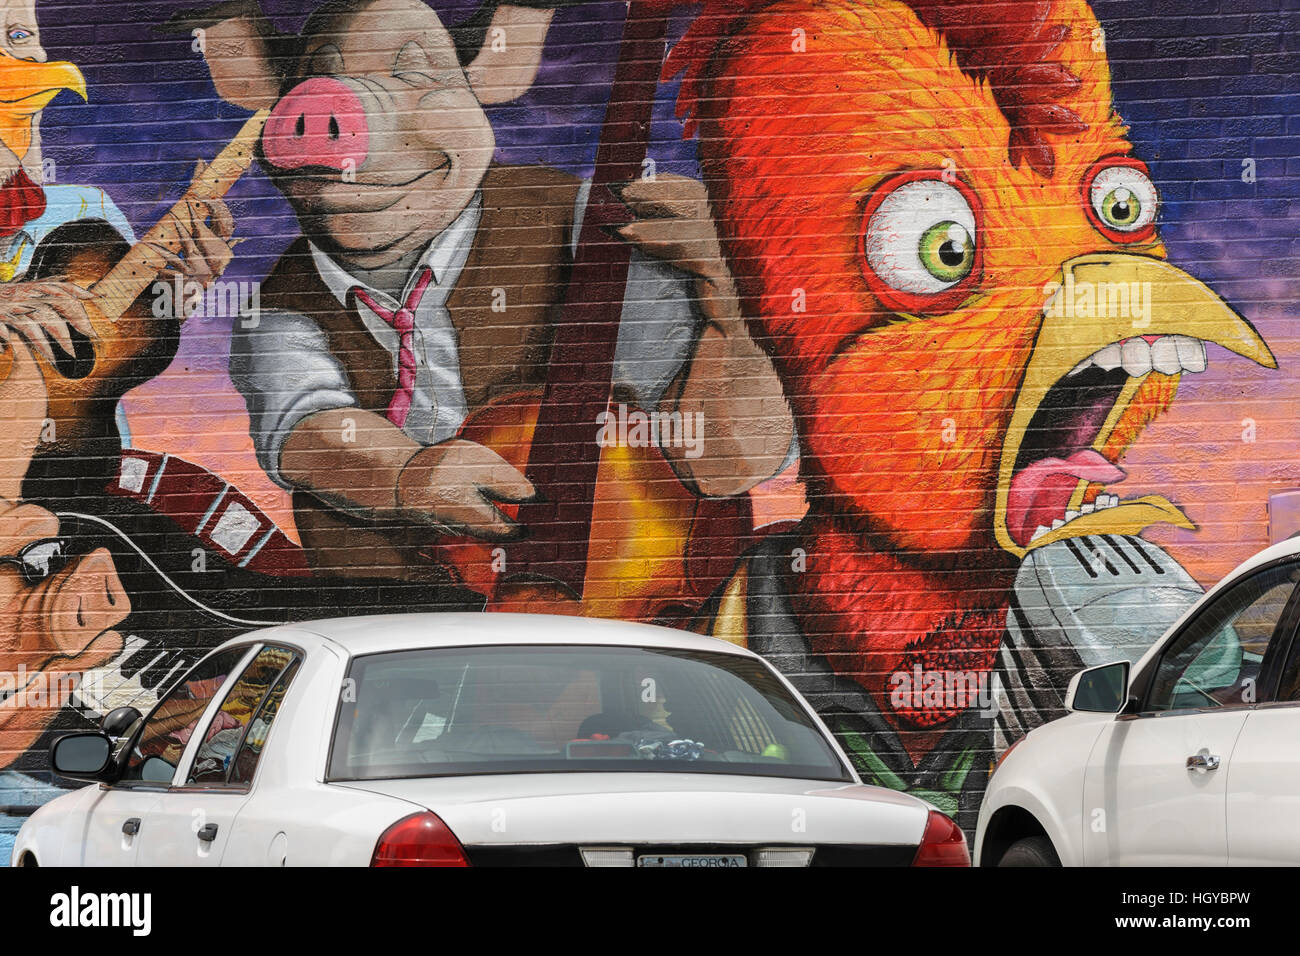 Mural showing animal musicians, Memphis, Tennessee, USA Stock Photo